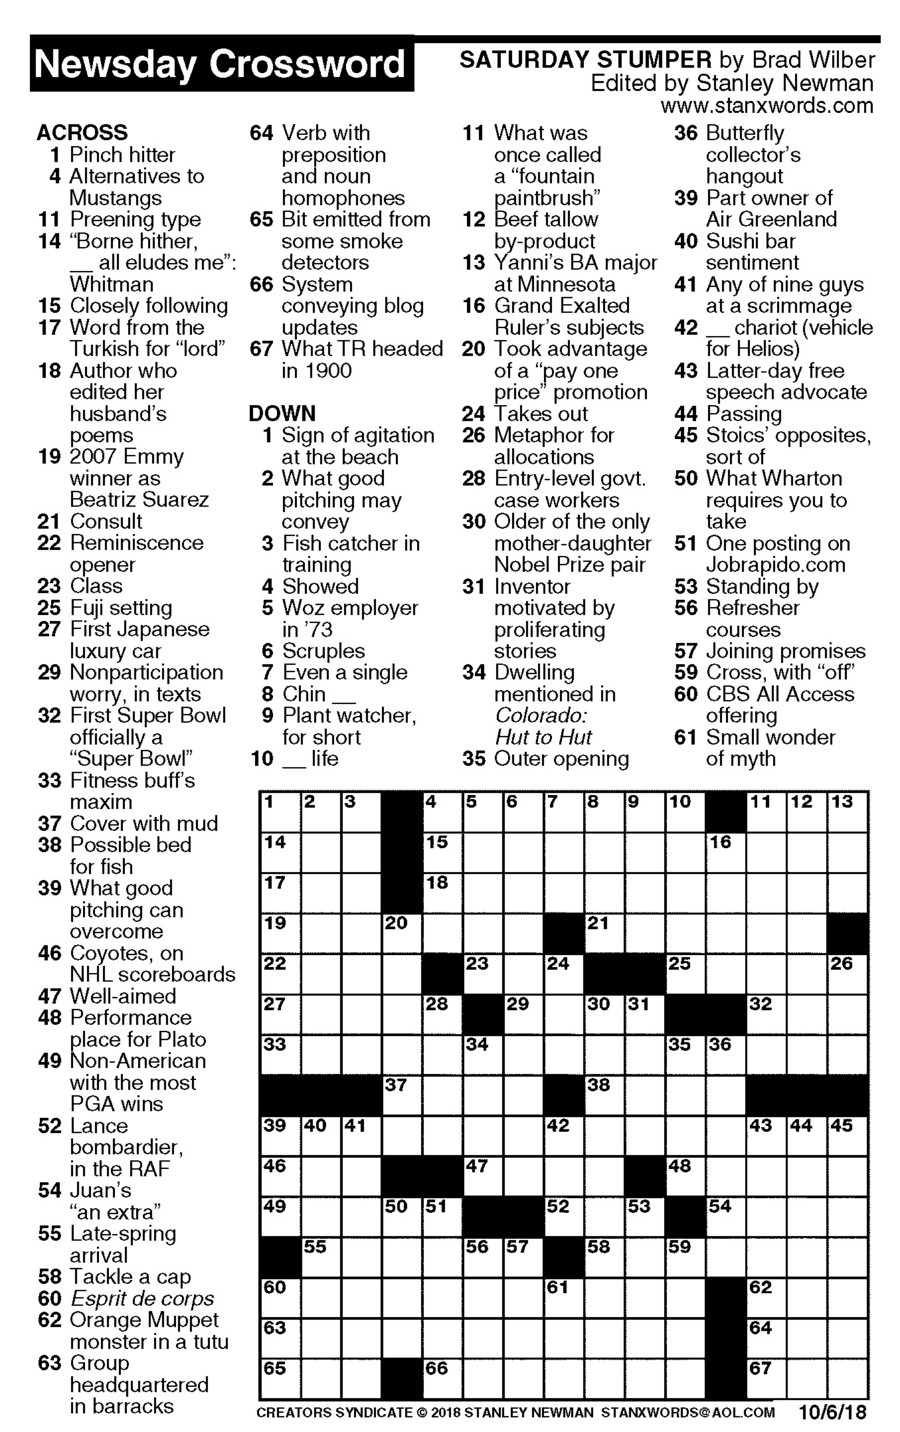 Newsday Crossword Puzzle For Oct 06, 2018,stanley Newman - Printable Crossword Newsday